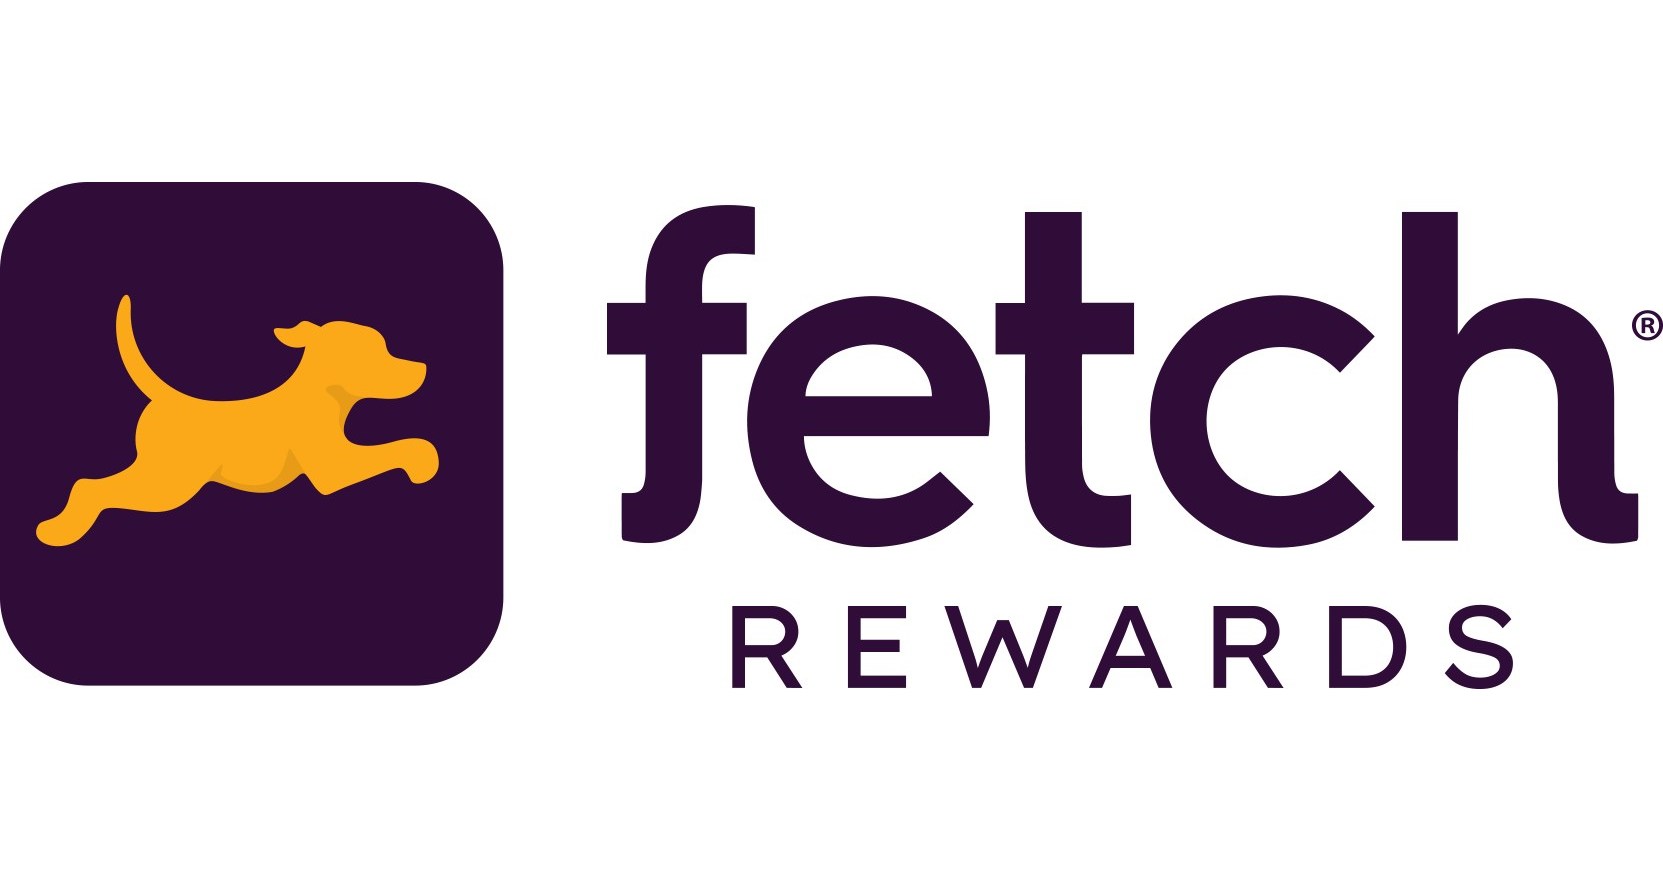 Fetch Rewards Closes $210 Million Round of Funding led by SoftBank Vision Fund 2